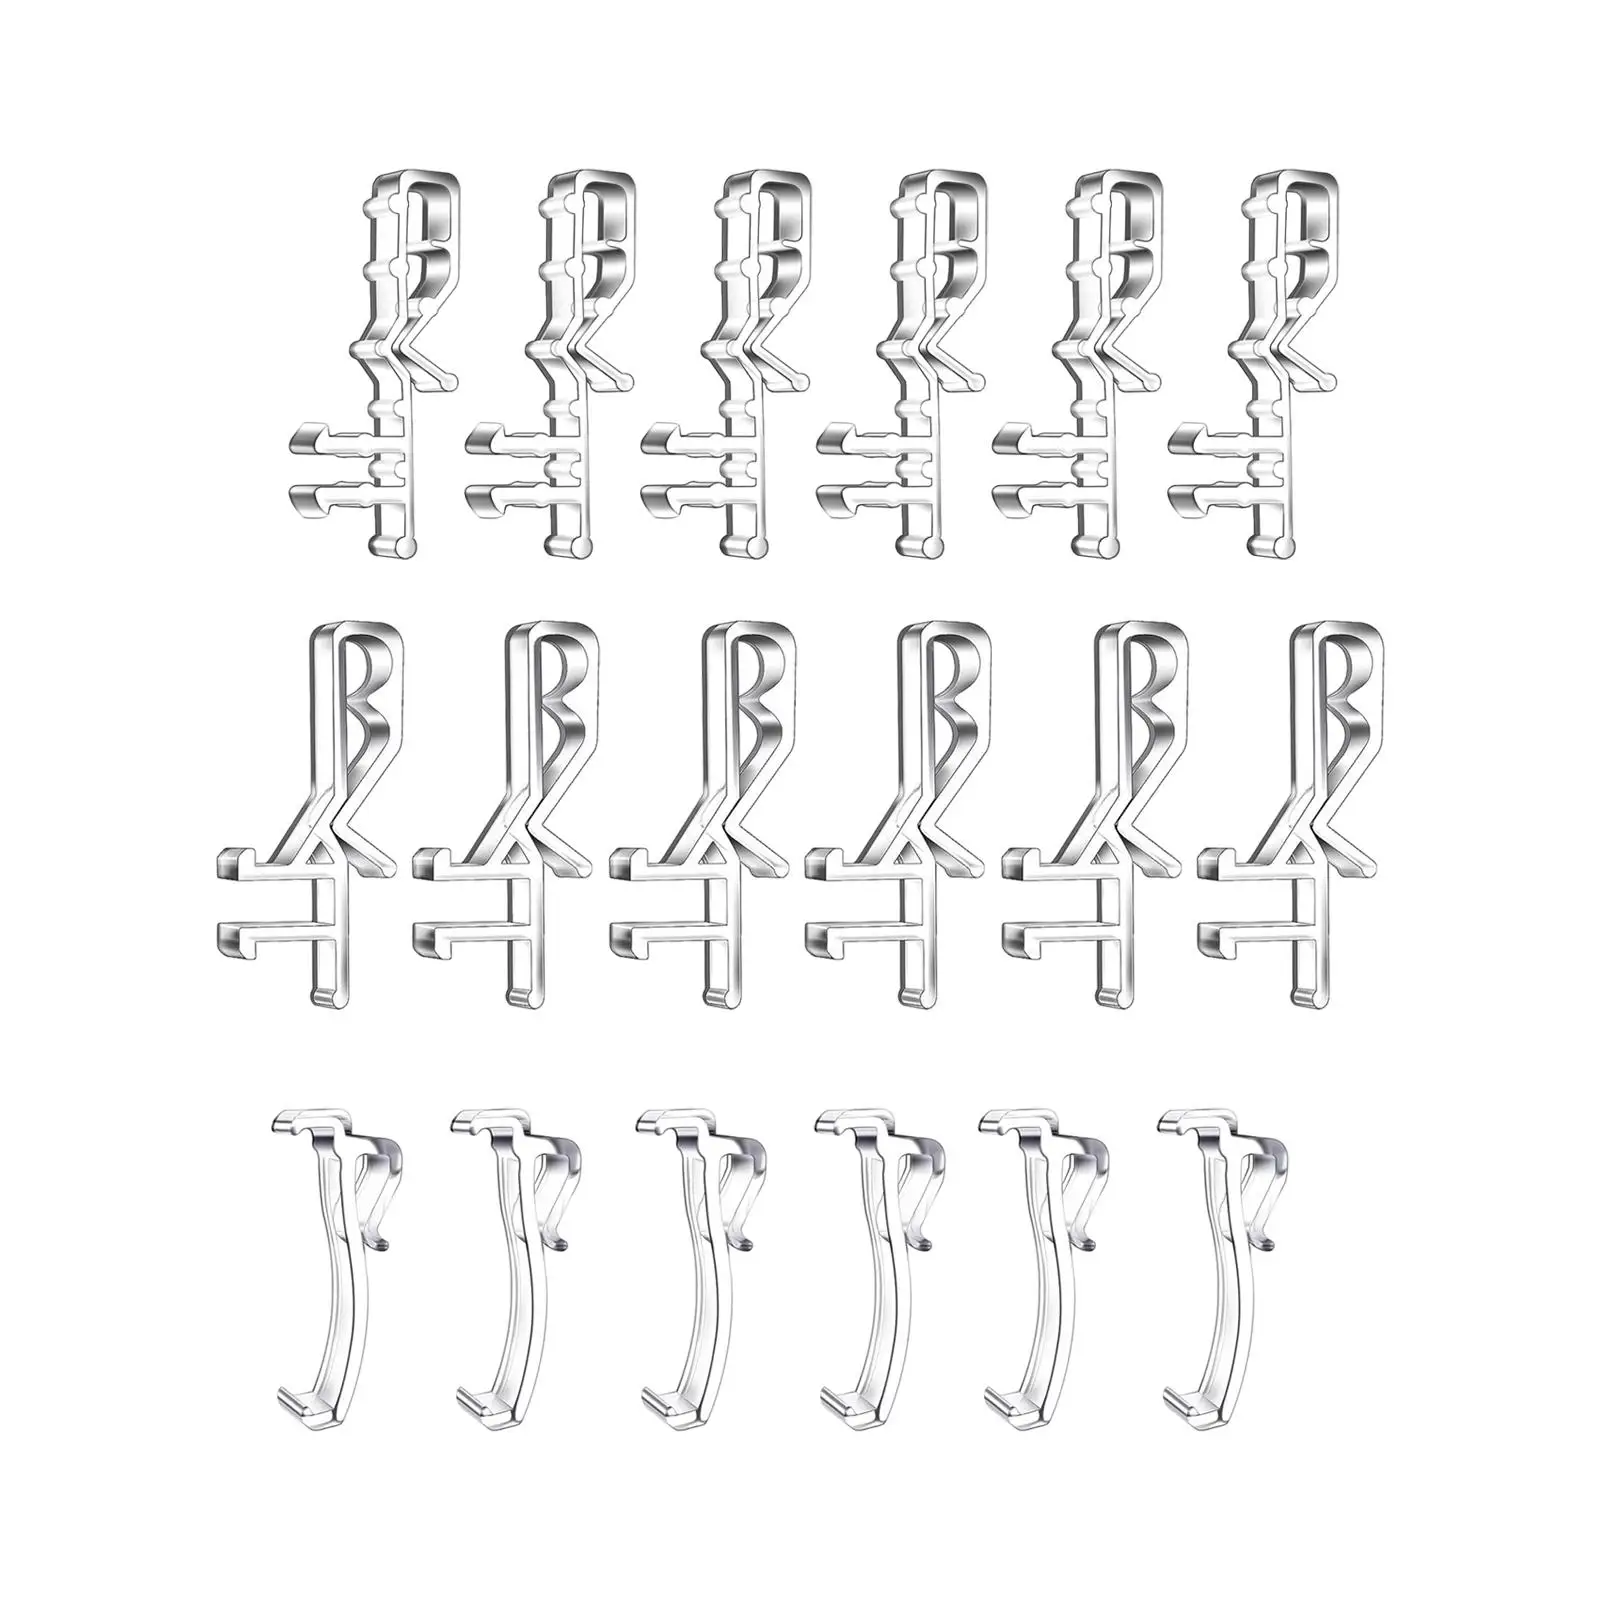 18x Channel Valance Clips Blind Channel Cover Clips Transparent Valance Retainers for Bedroom Living Room Home Kitchen Office